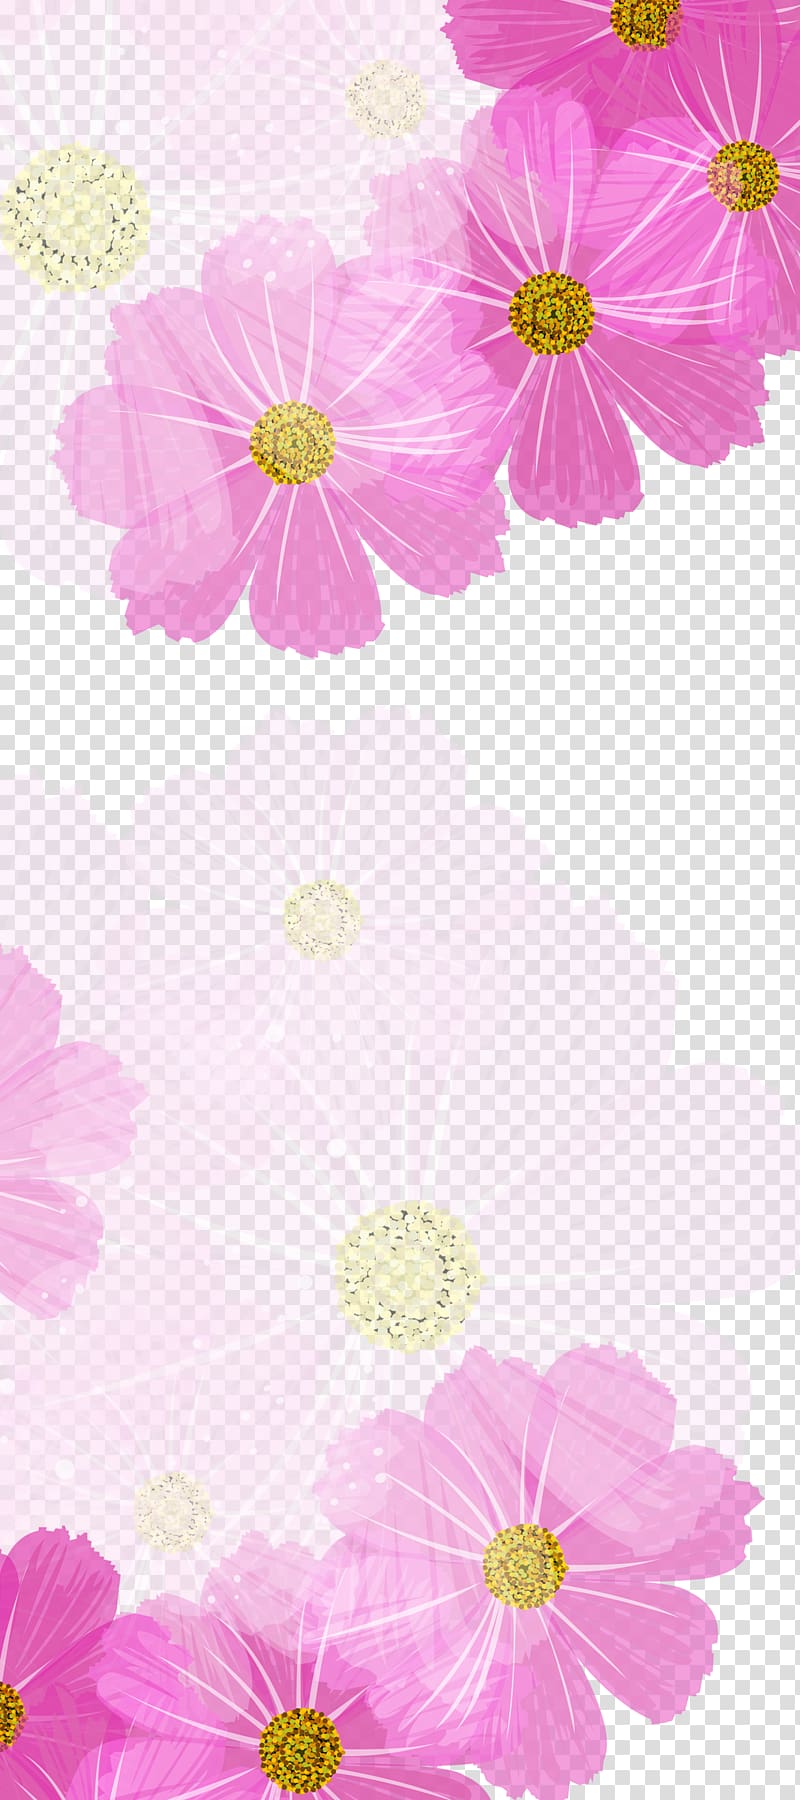 pink and white cosmos flowers , Chrysanthemum Color Purple, Purple chrysanthemum background transparent background PNG clipart